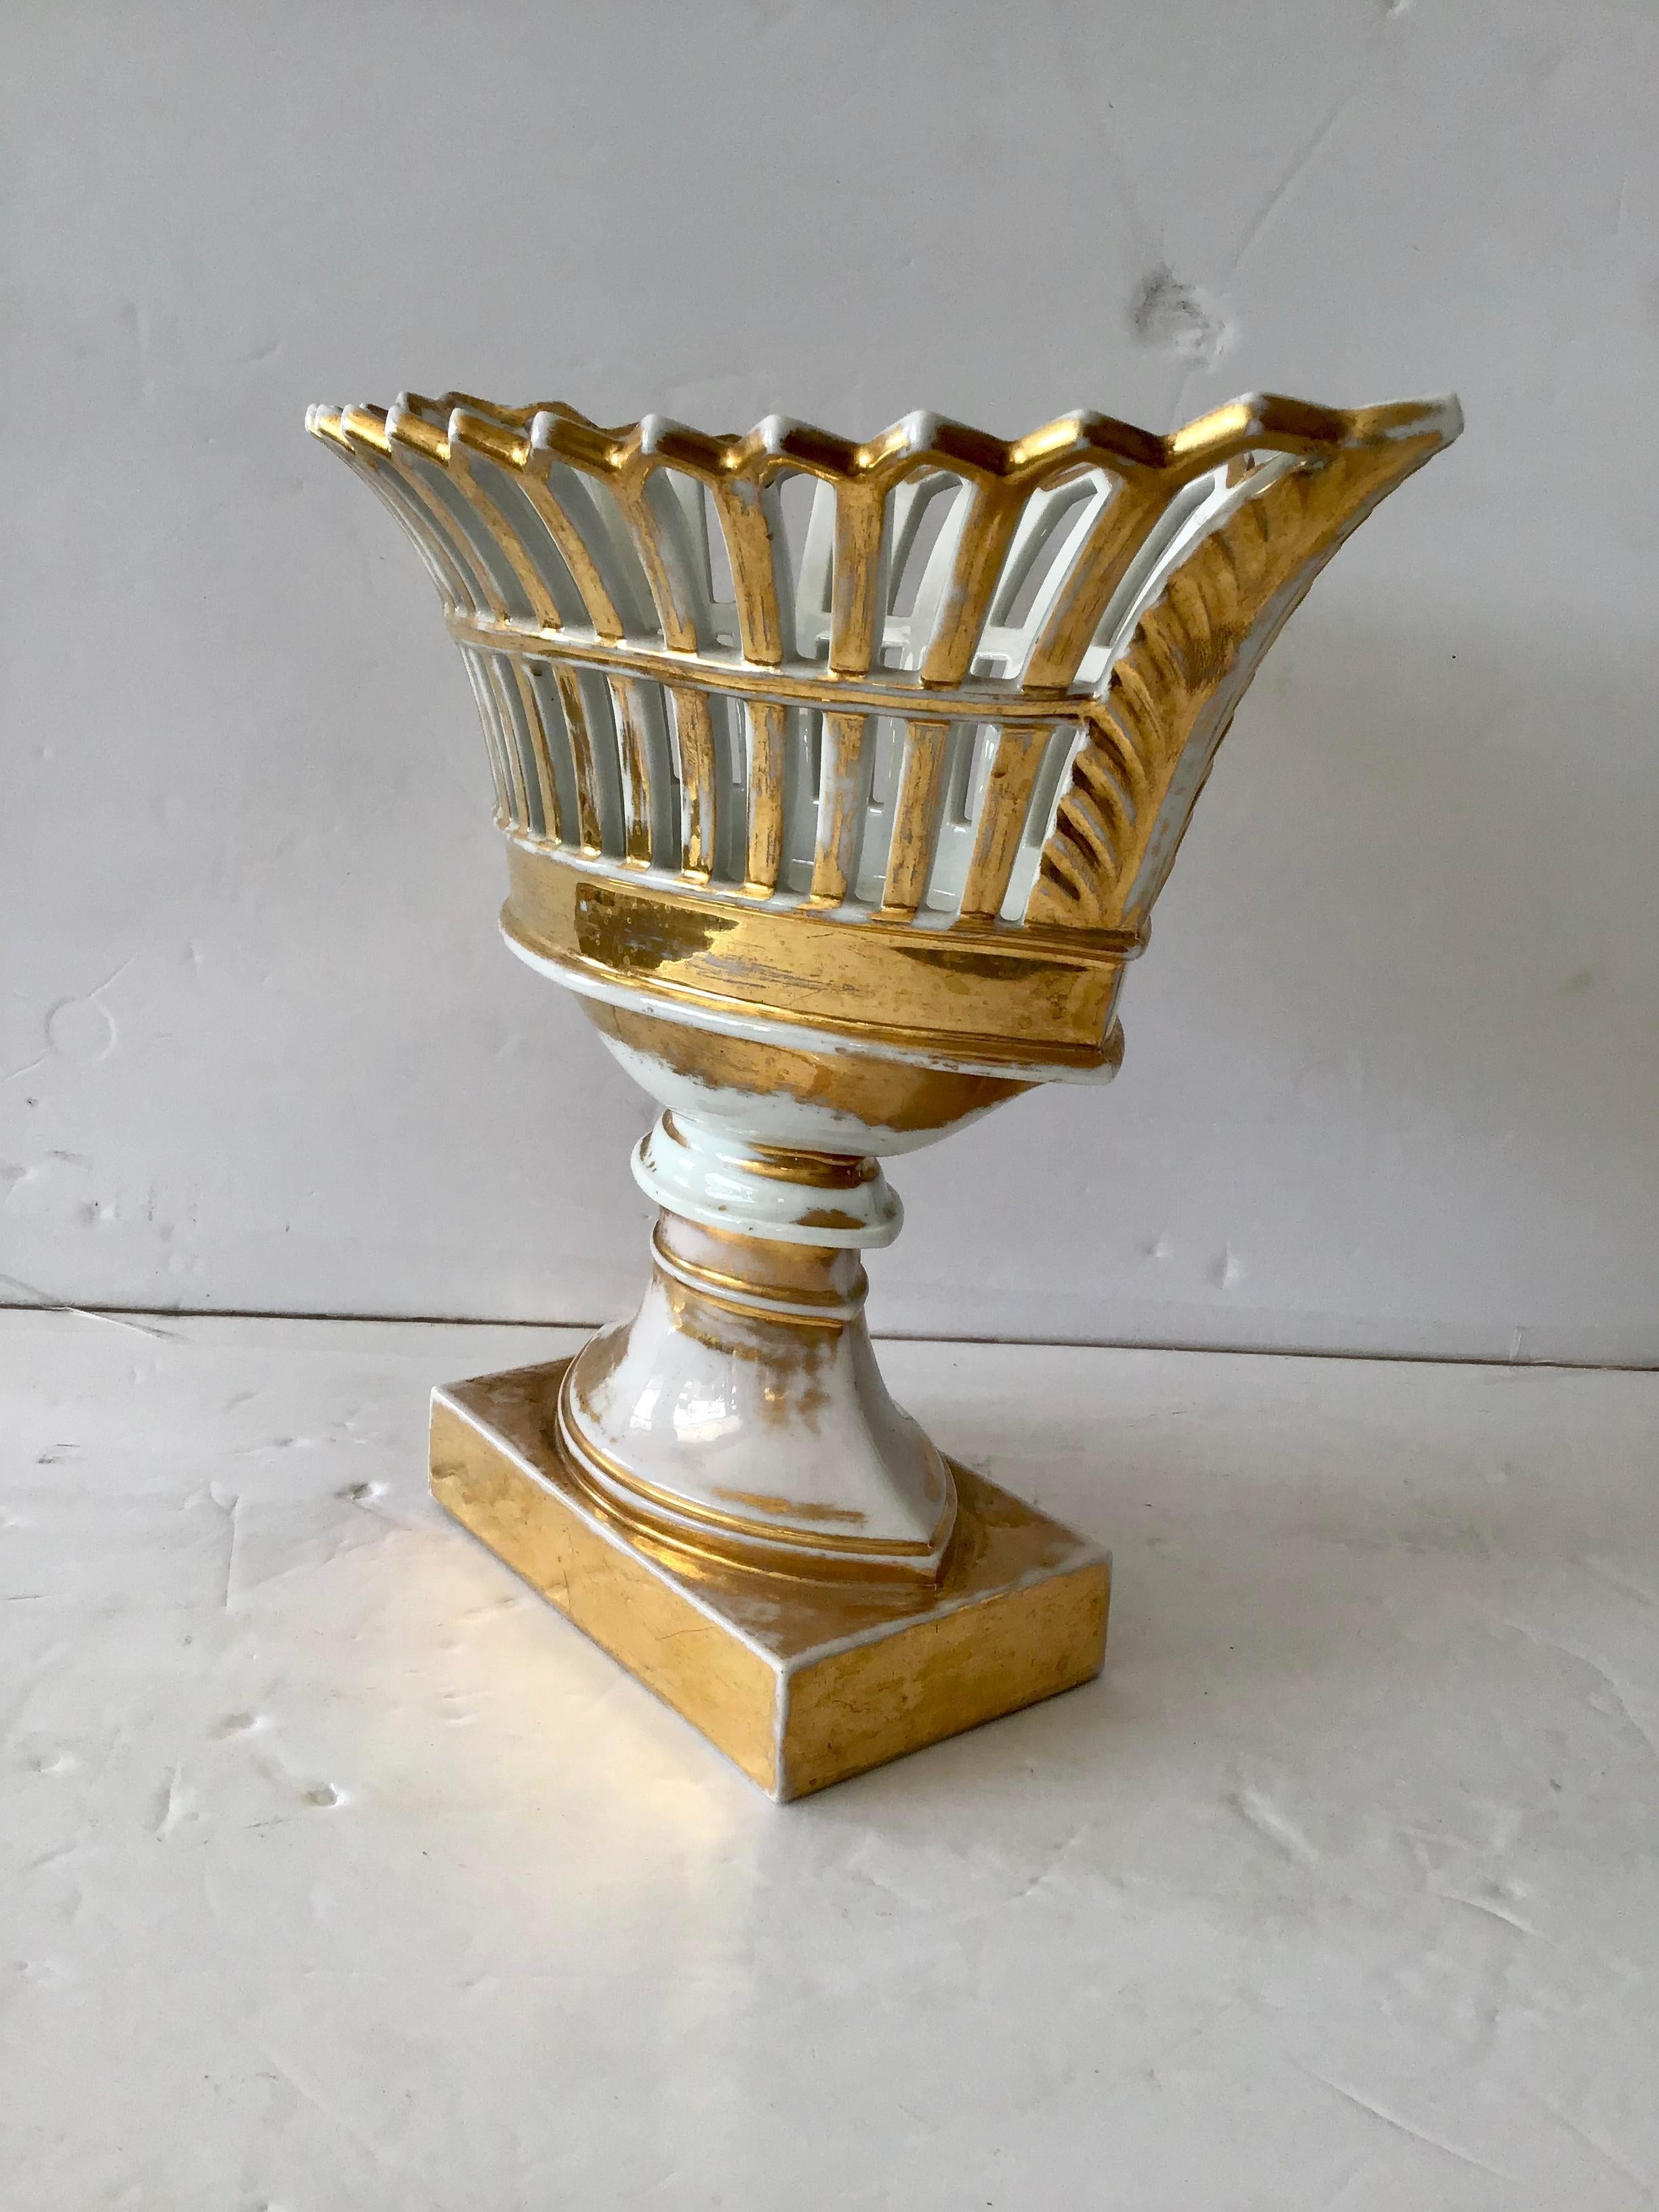 Very rare French Paris Ceramics urn with nice gold details. Add some architecture to your decor.